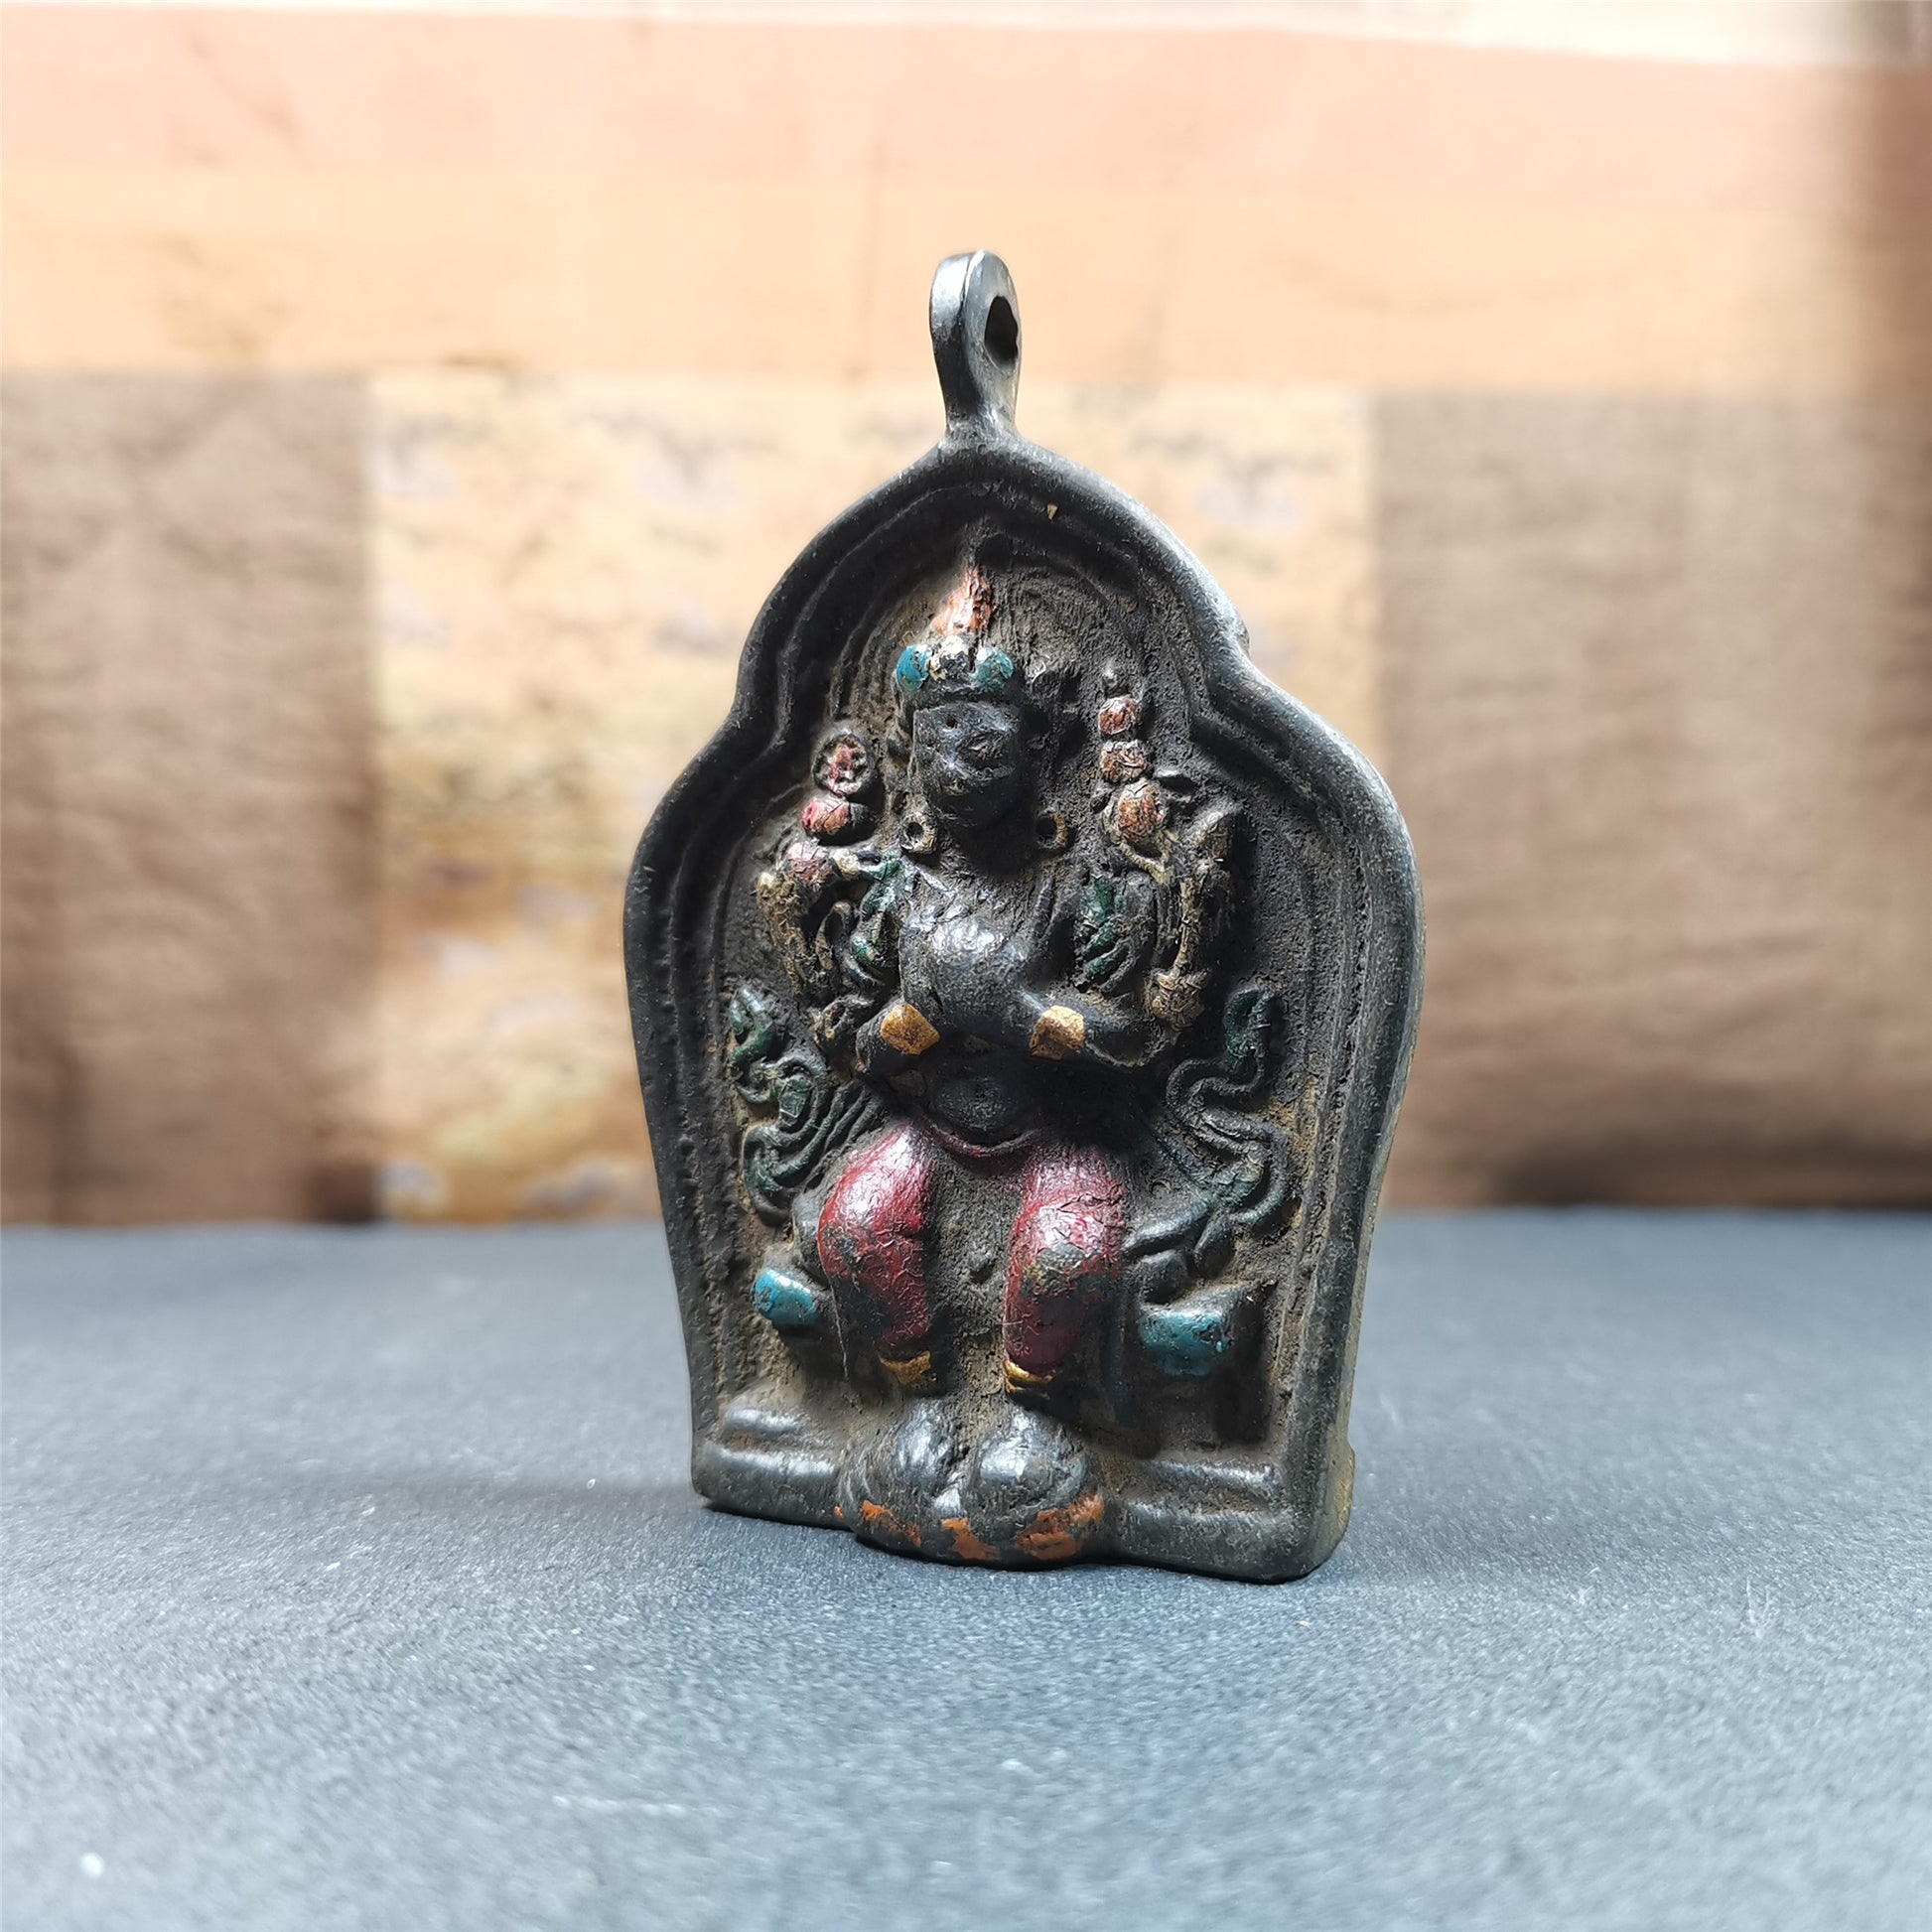 This maitreya statue was collected from Labrang Monastery,Qinghai,about 80 years old. It is an amulet of maitreya,made of copper,painted with mineral pigments,size is 2.95 by 1.97 inches,about 80 years old.